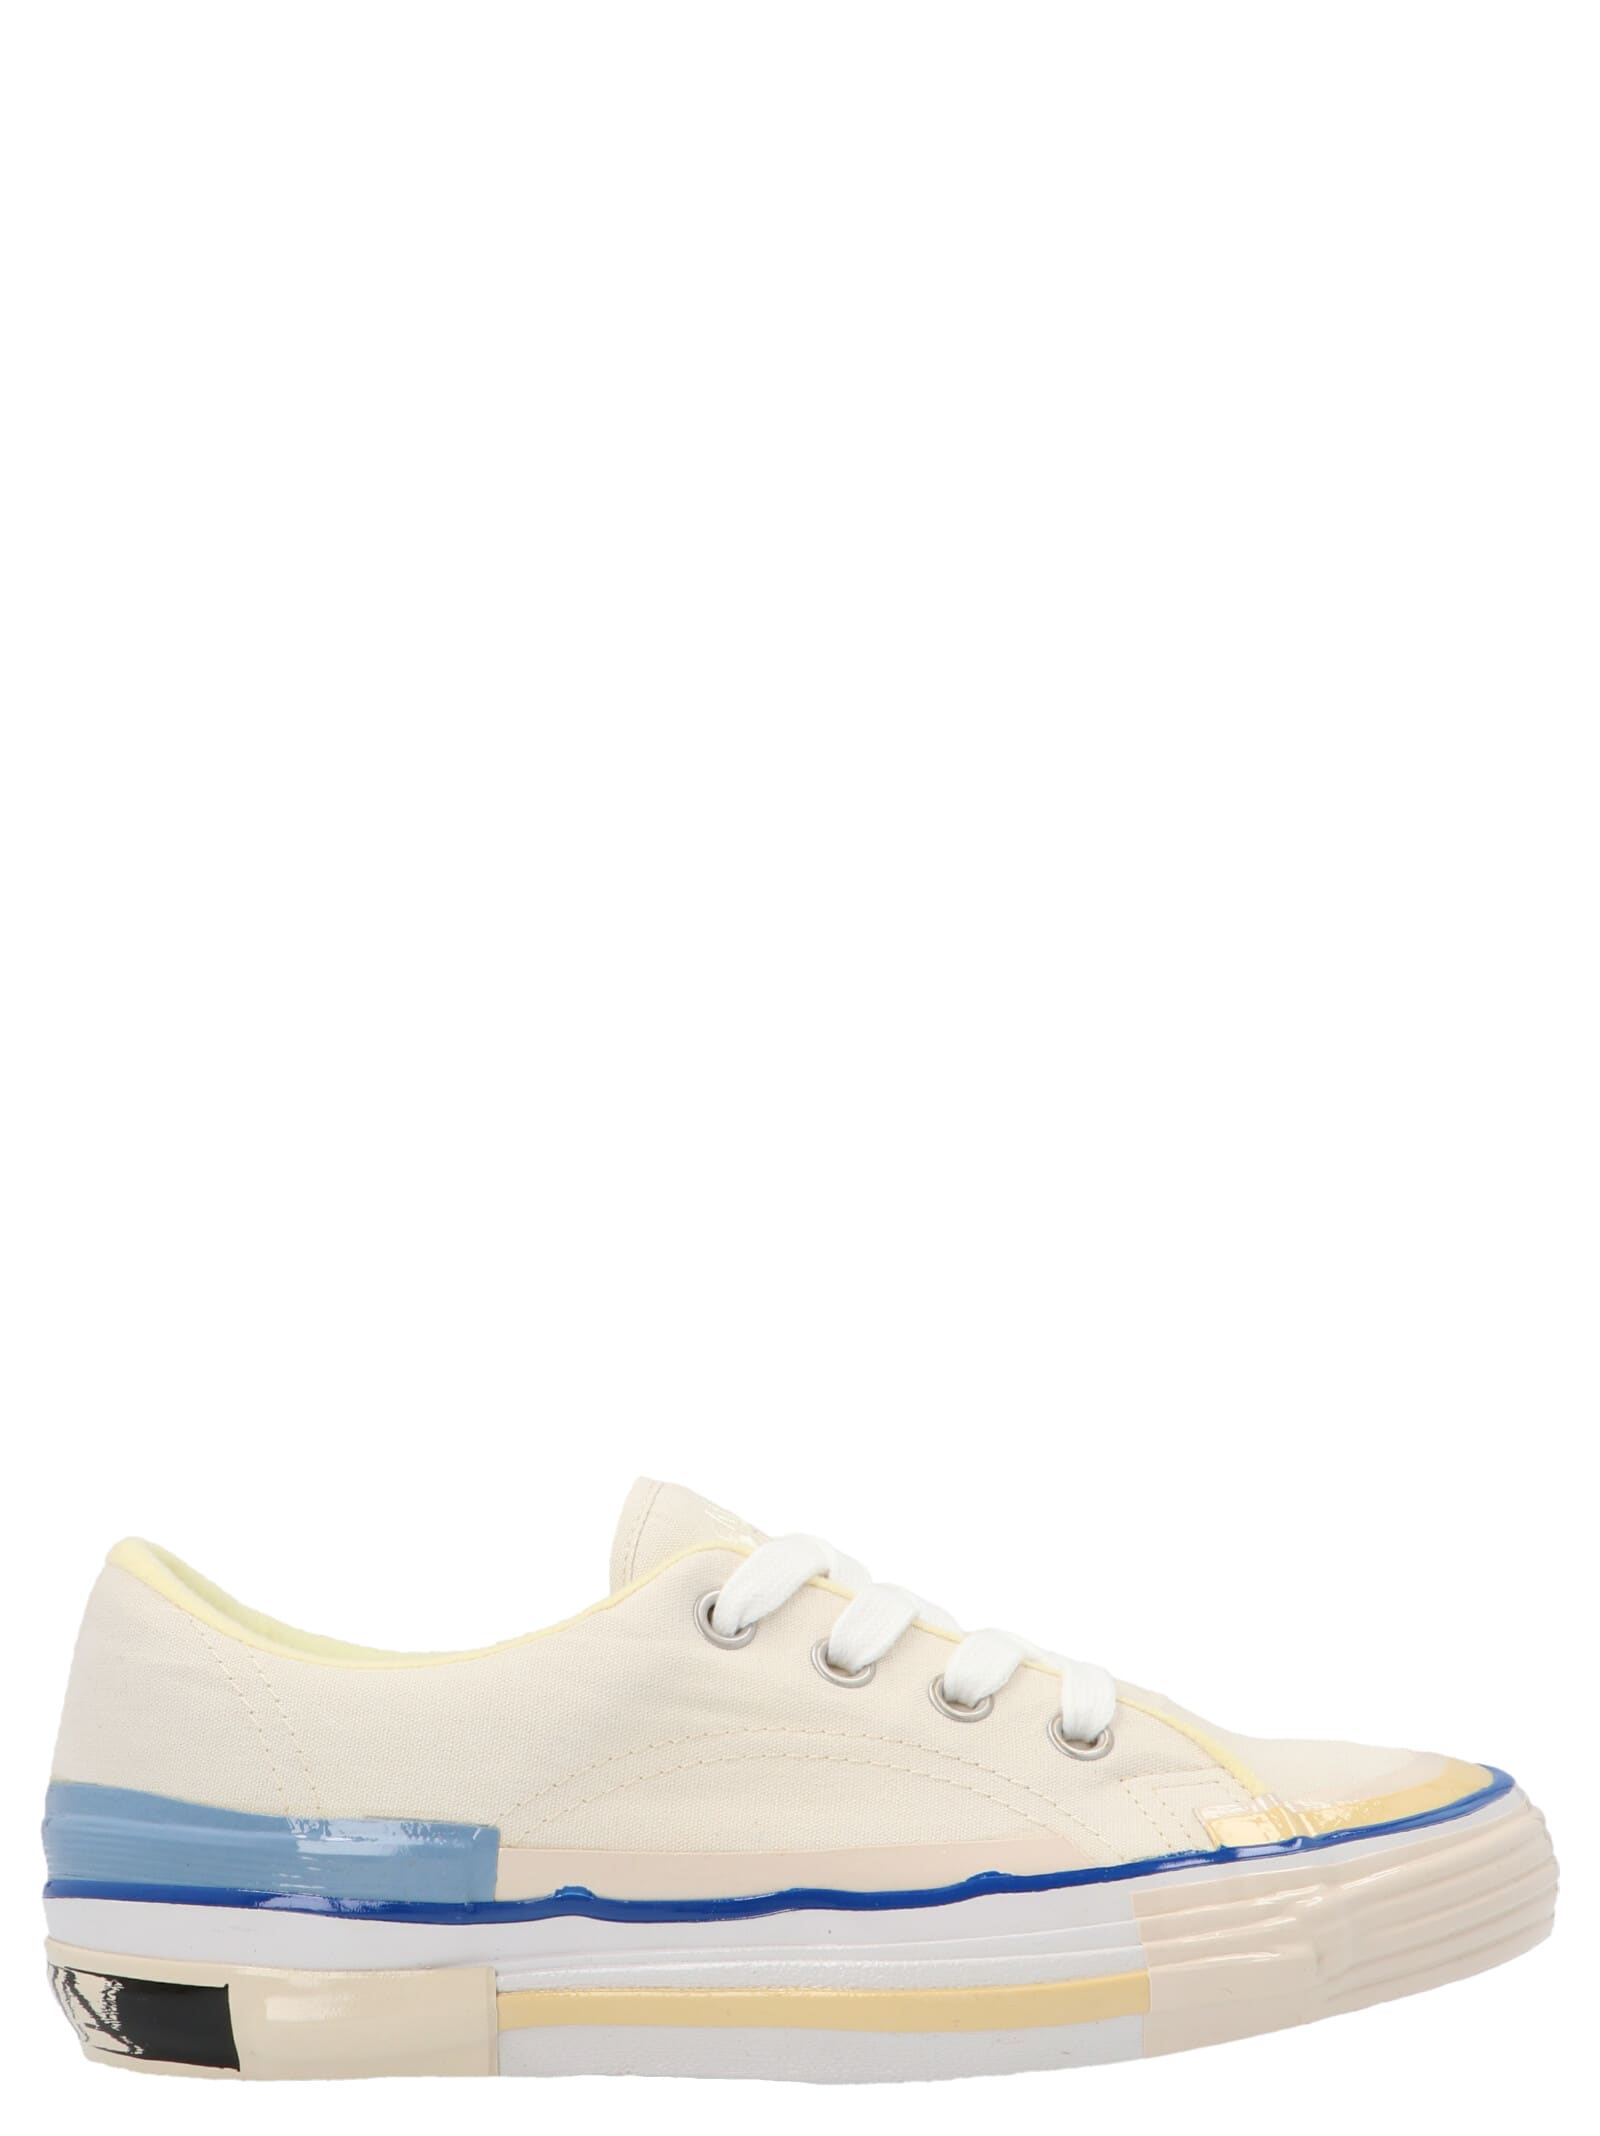 Lanvin mlted Vulcanized Shoes